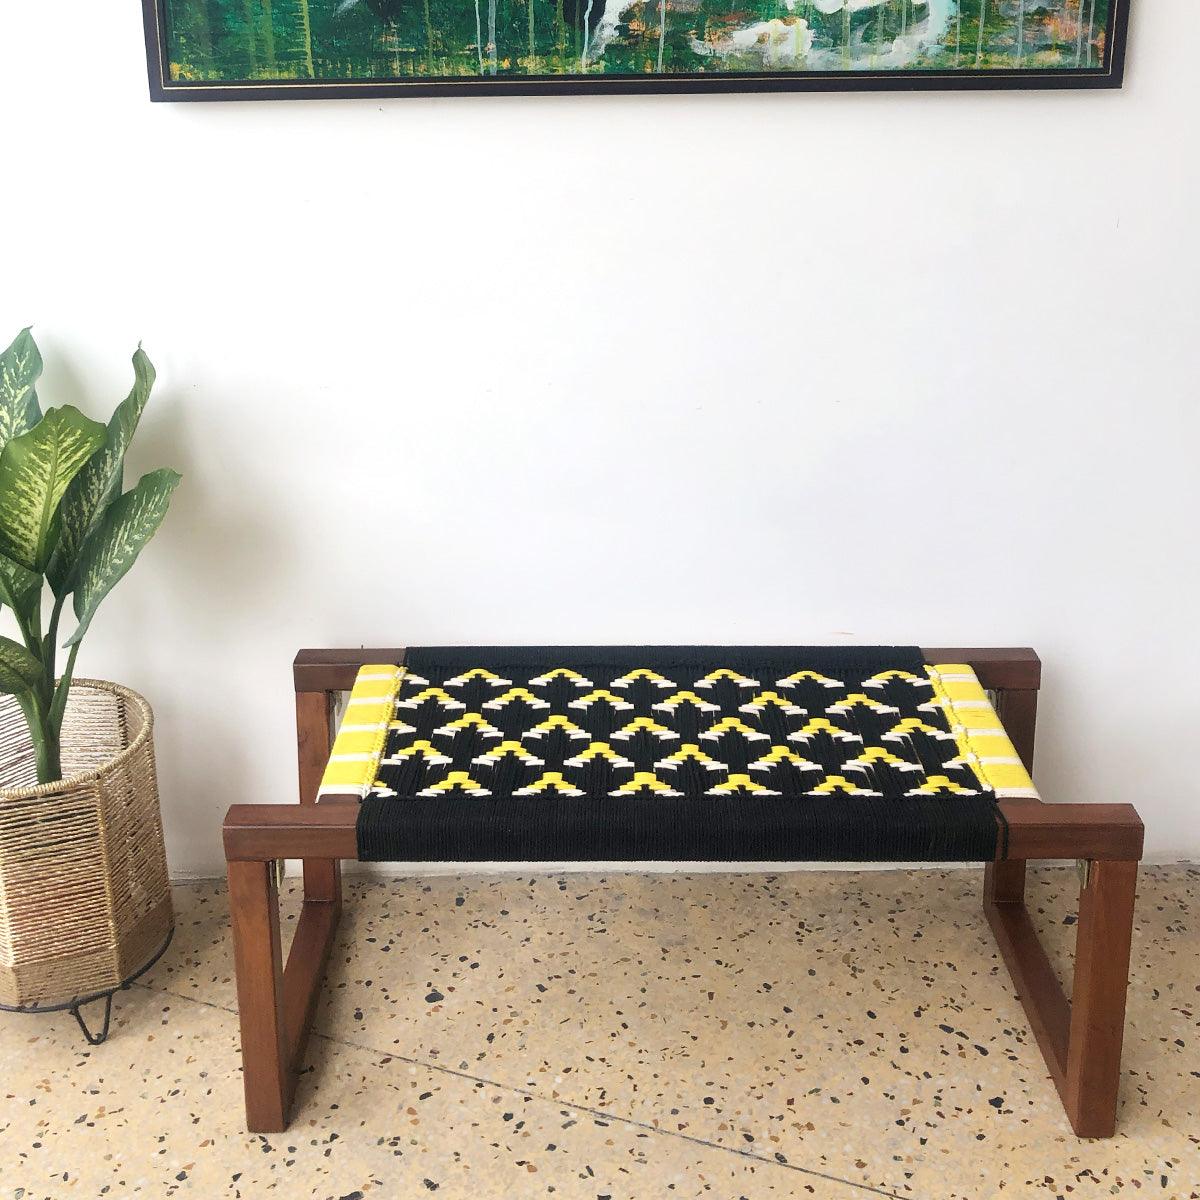 Busy Bee Recycled Cotton Wooden Bench - Sirohi.org - Colour_Black, Colour_Yellow, Purpose_Indoor Seating, Purpose_Outdoor Seating, Rope Material_Recycled Cotton